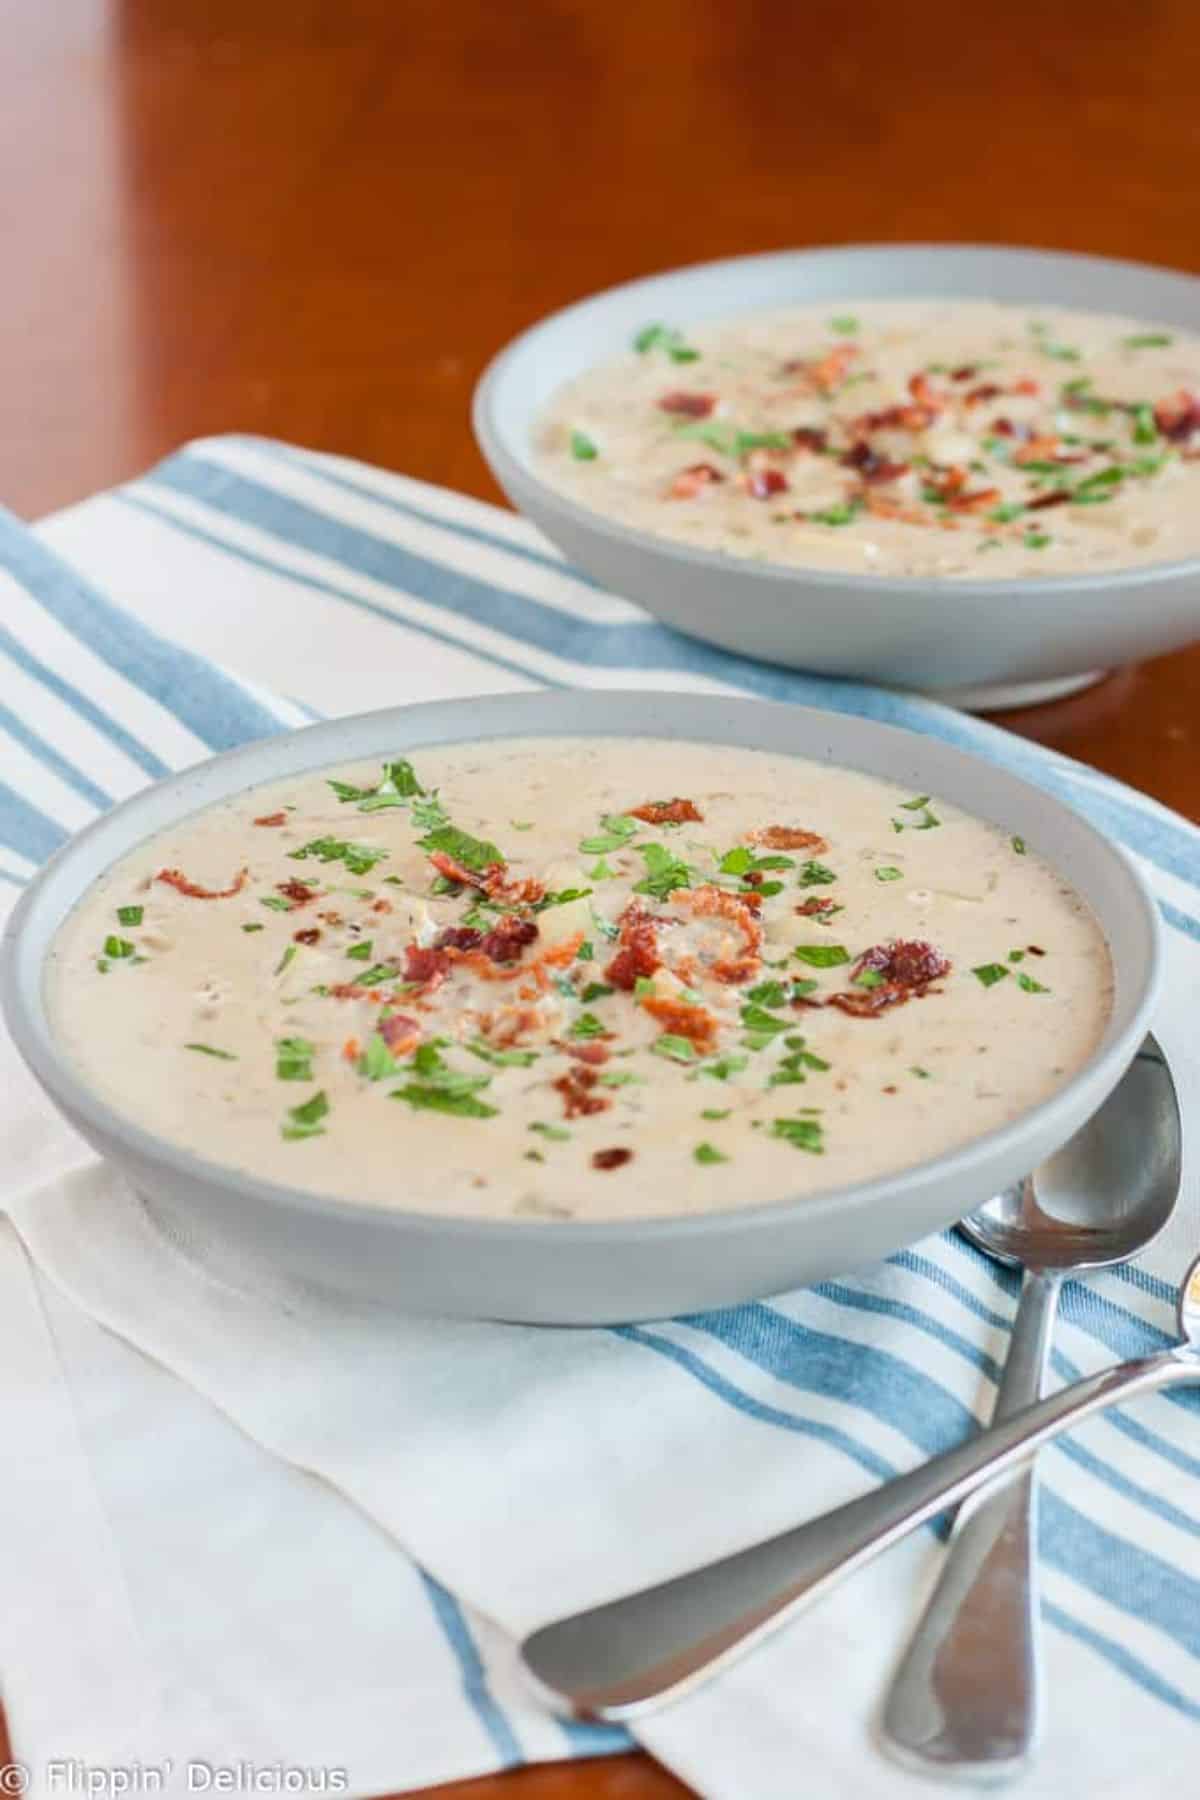 Mouth-watering Gluten-Free Clam Chowder in two gray bowls.